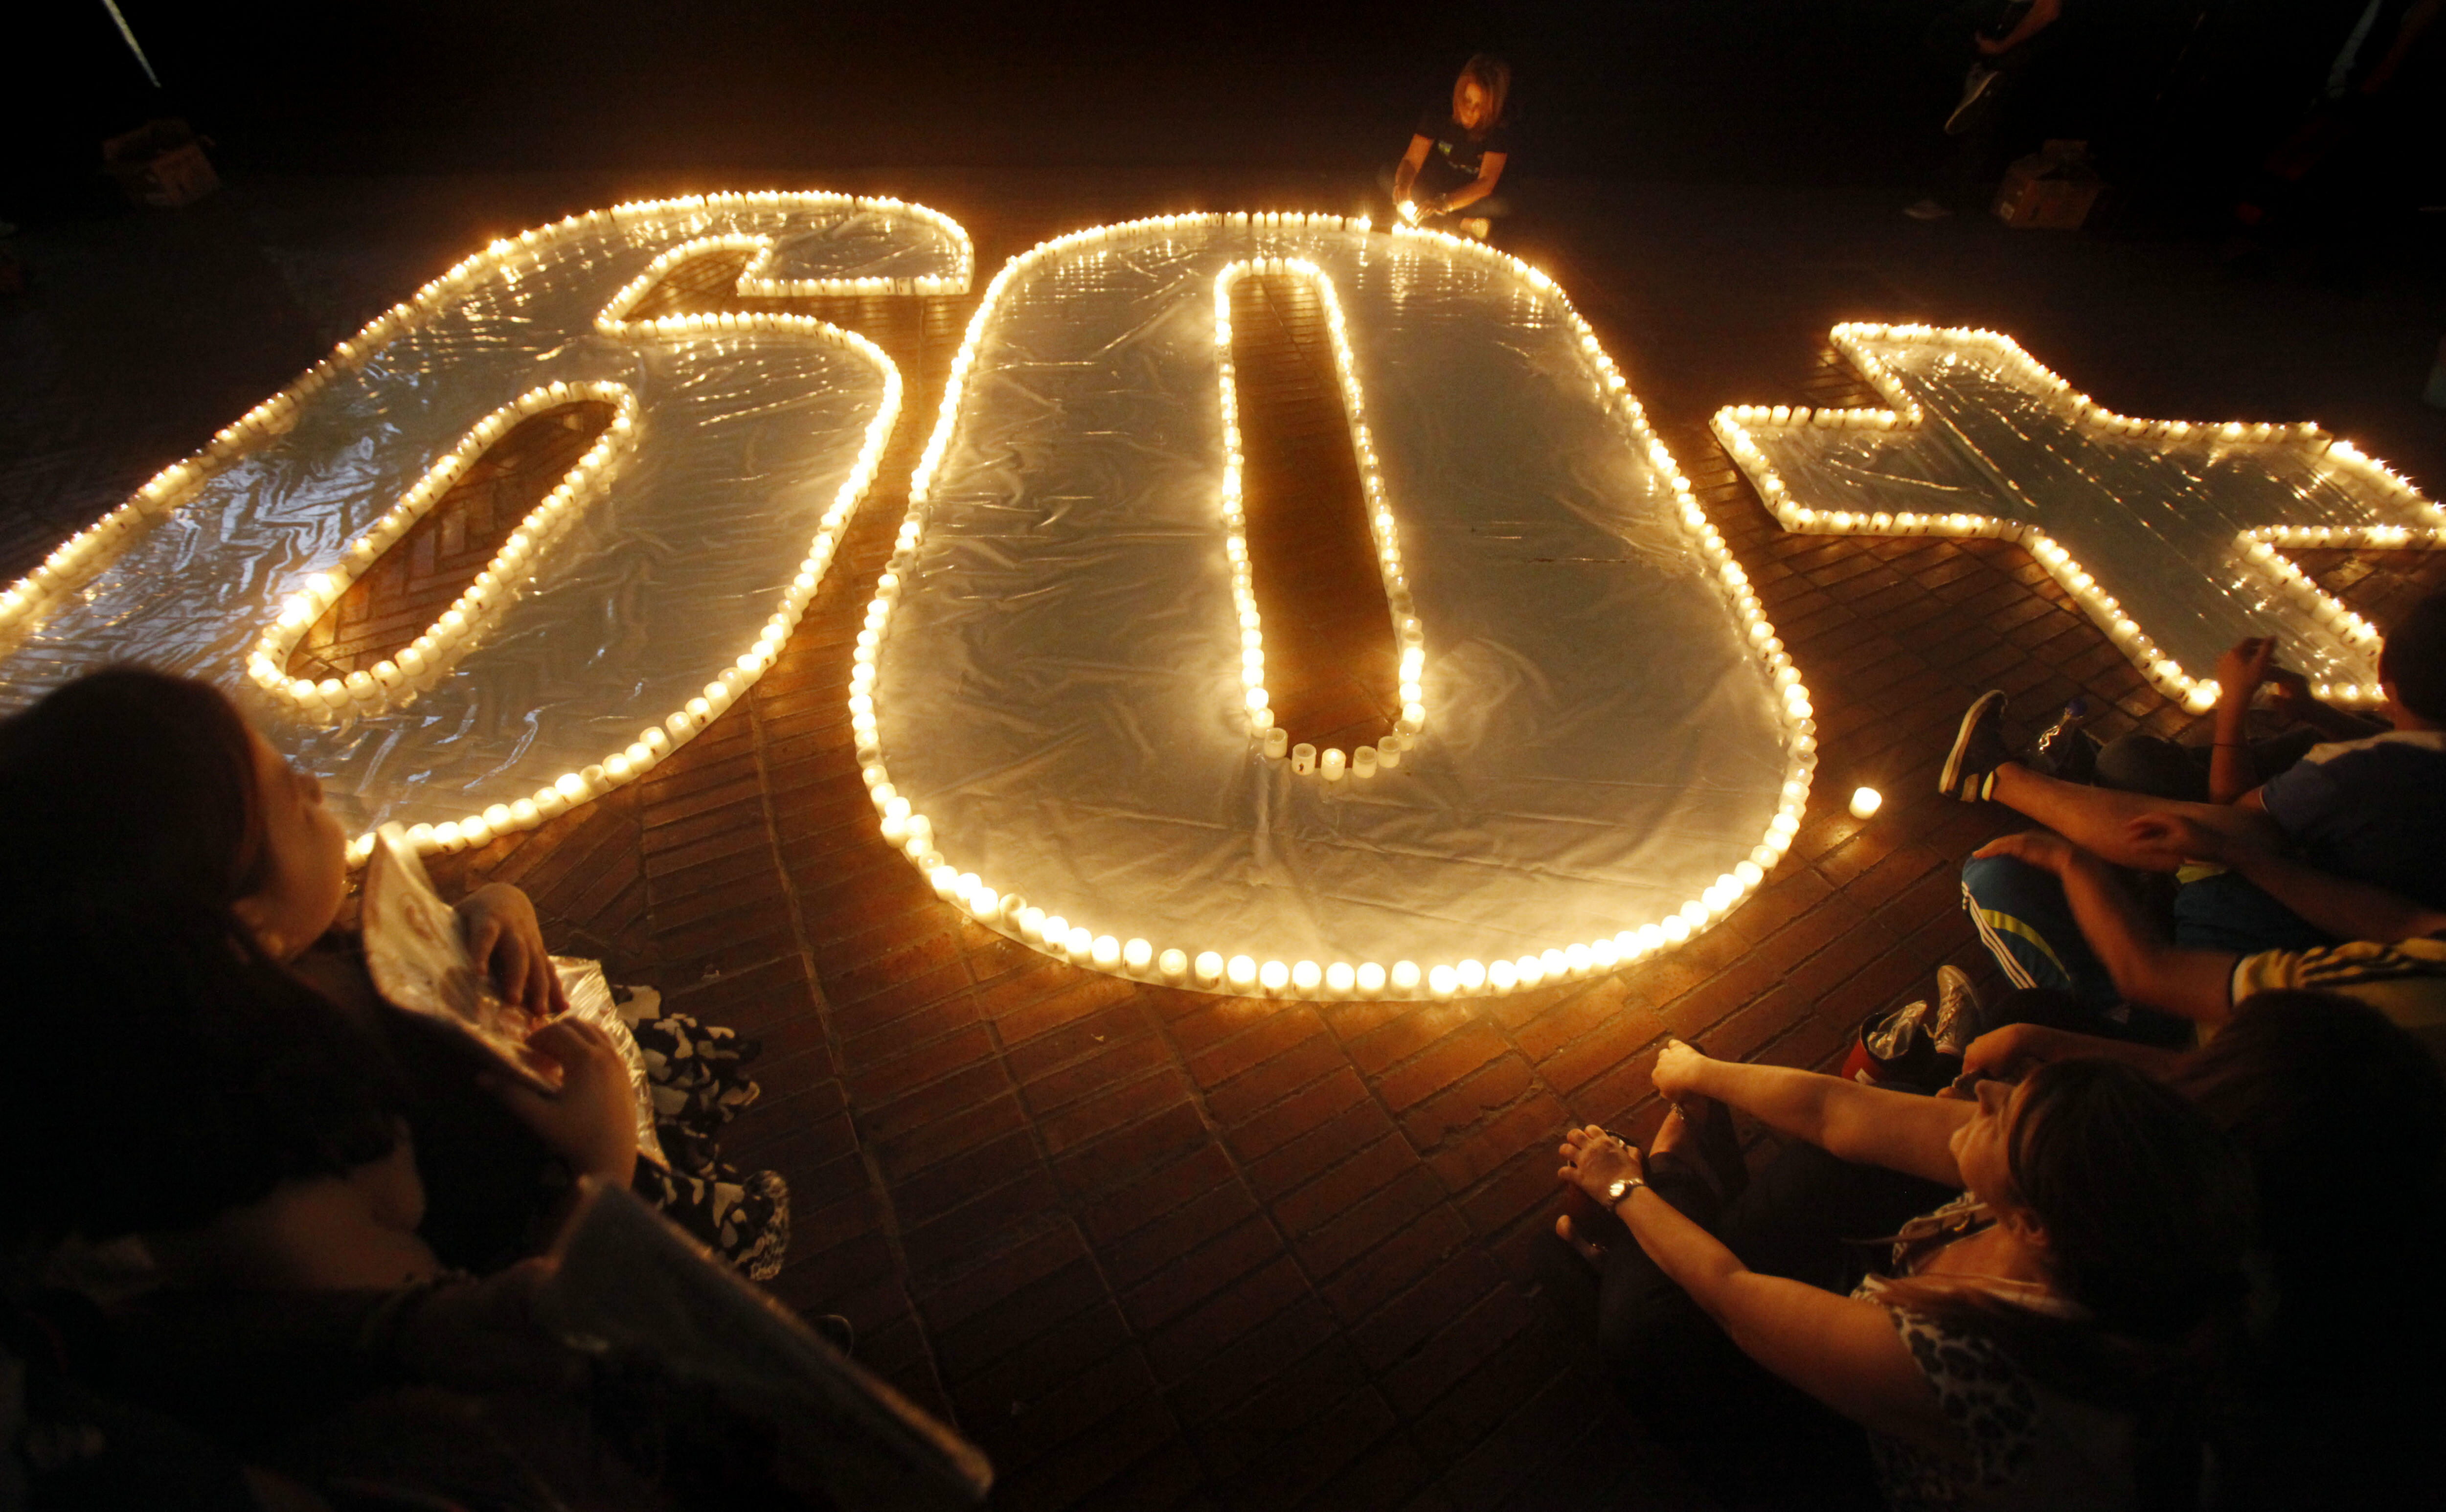 EARTH HOUR. People light candles during Earth Hour in Cali, Colombia, 29 March 2014. Earth Hour takes place worldwide at 8.30 p.m. local time and is a global call to turn off lights for 60 minutes to raise awareness of the danger of global climatic change. EPA/CHRISTIAN ESCOBAR MORA 